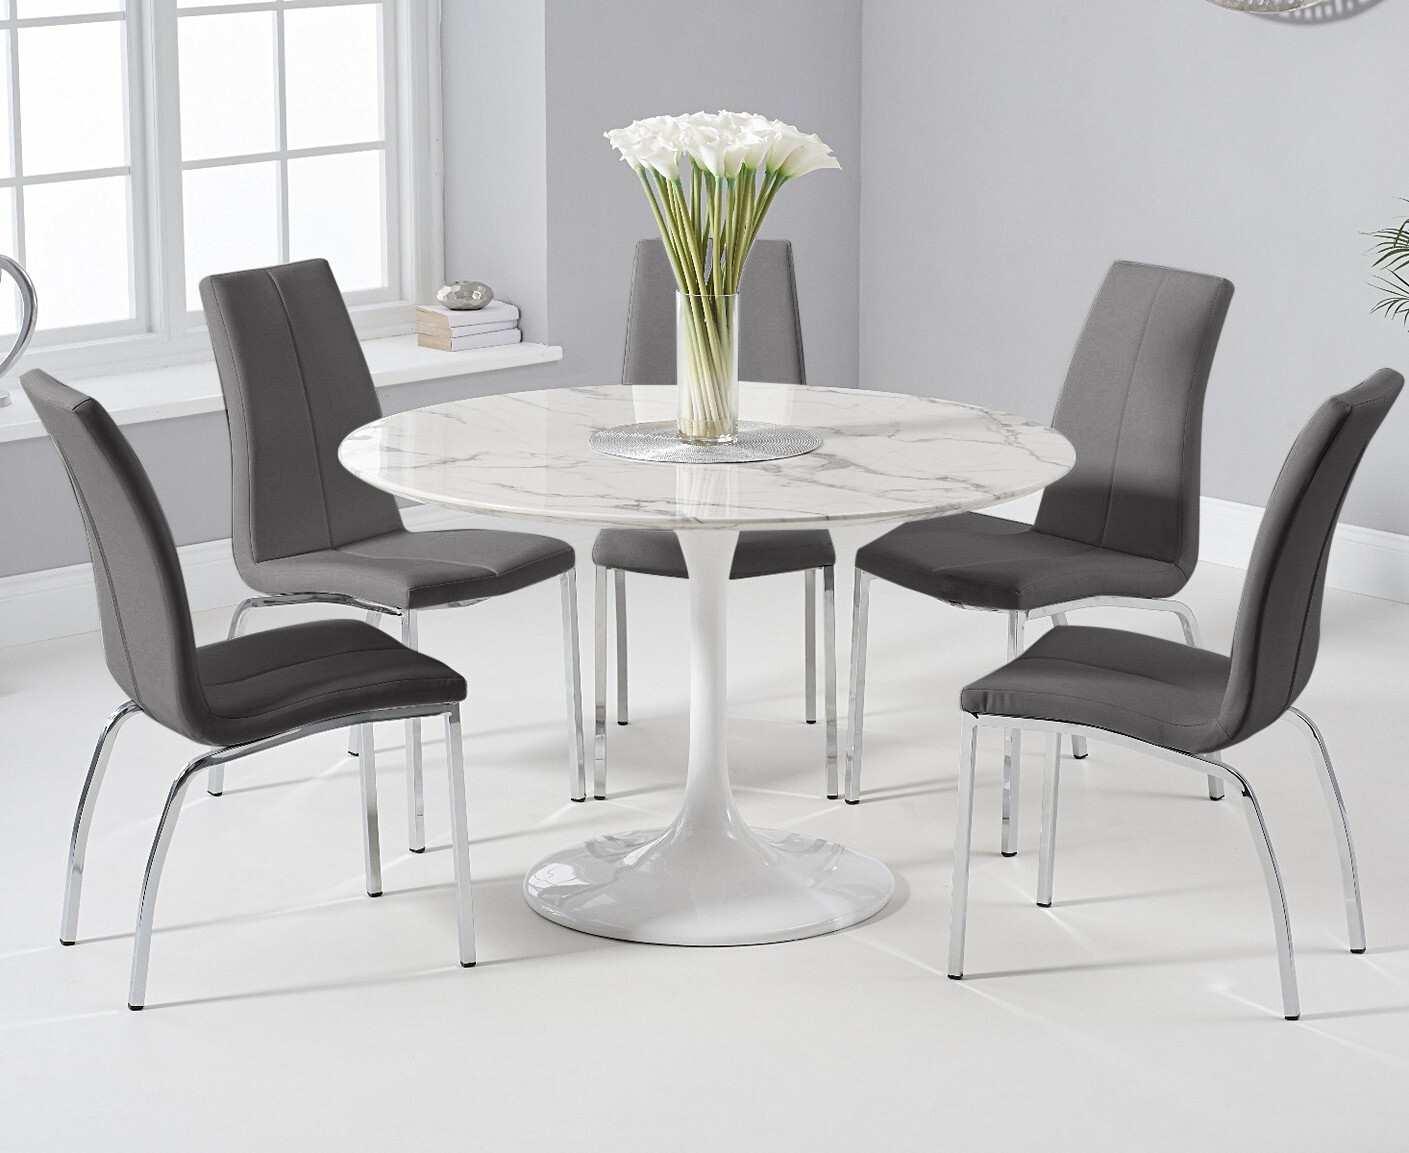 Photo 2 of Brighton 120cm round marble white dining table with 4 grey marco chairs